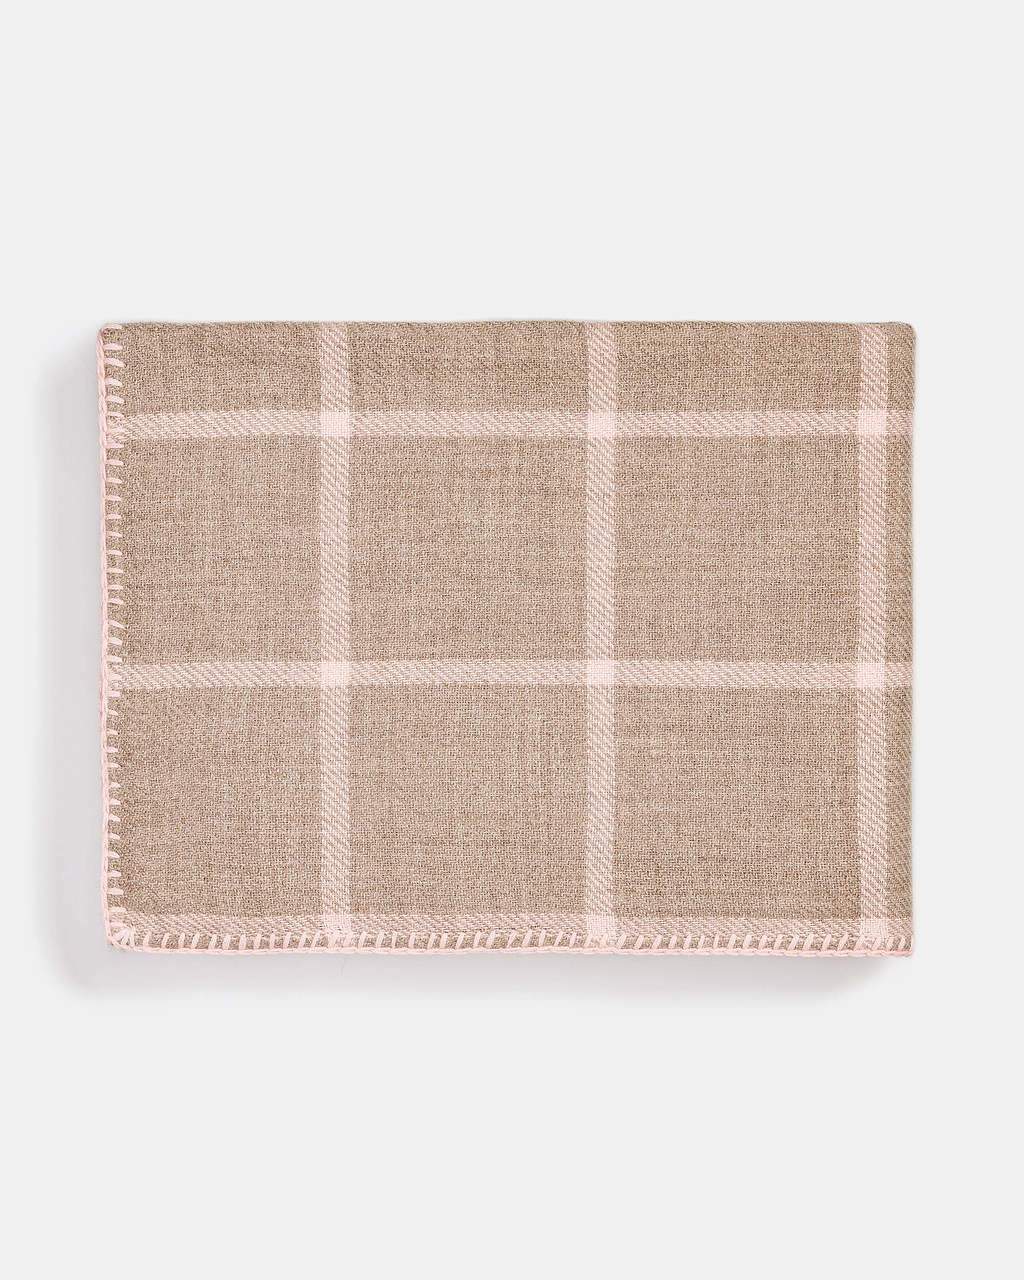 Graydon Alpaca Throw in Light Taupe and Light Pink by Alicia Adams